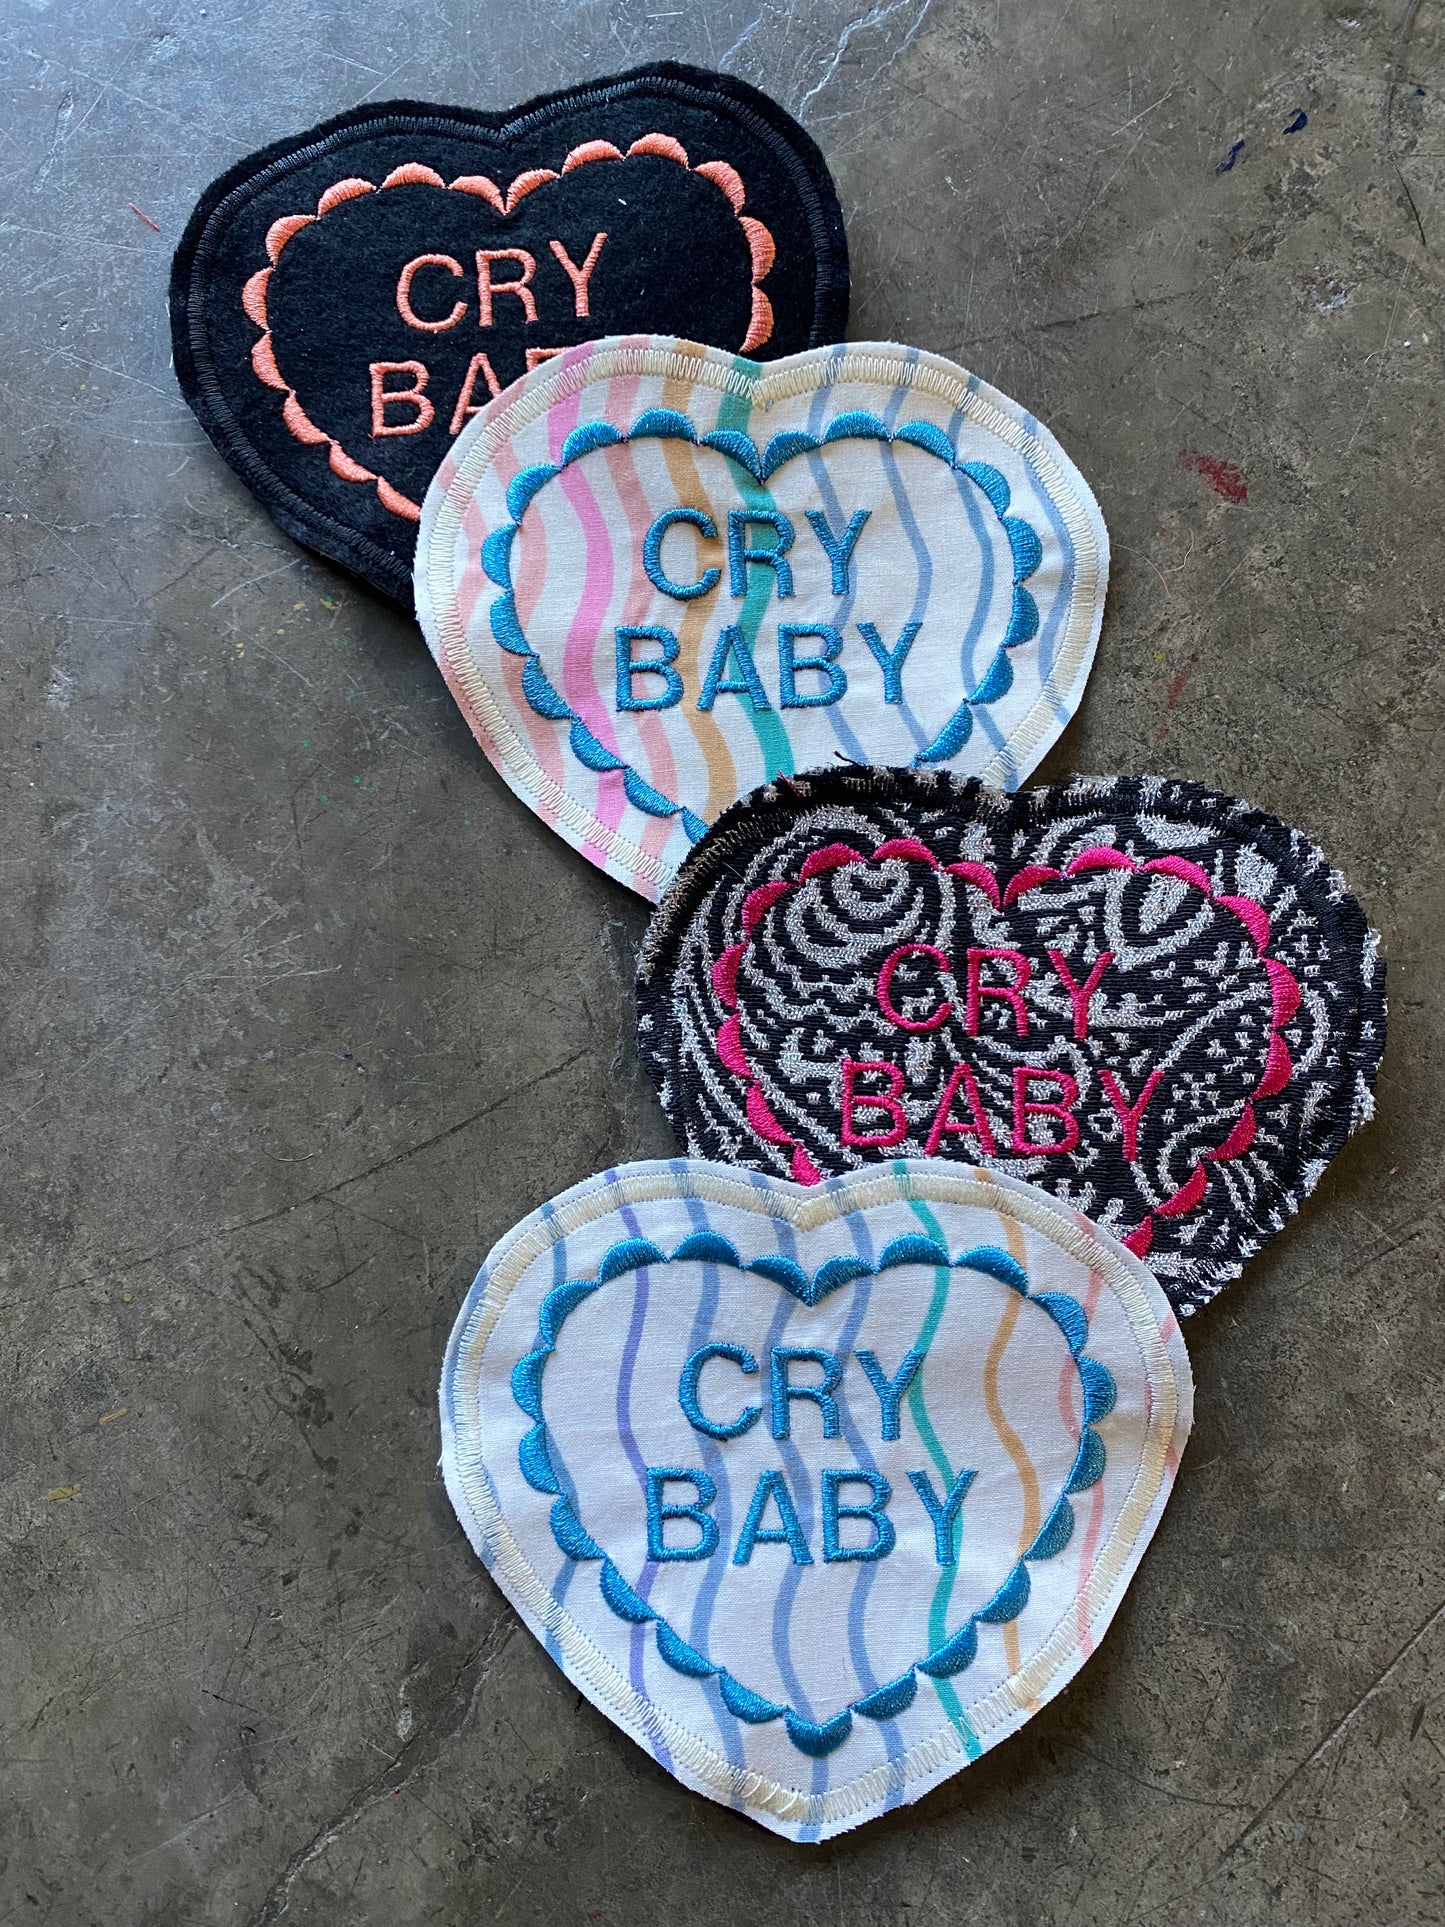 Cry Baby Embroidered Patch